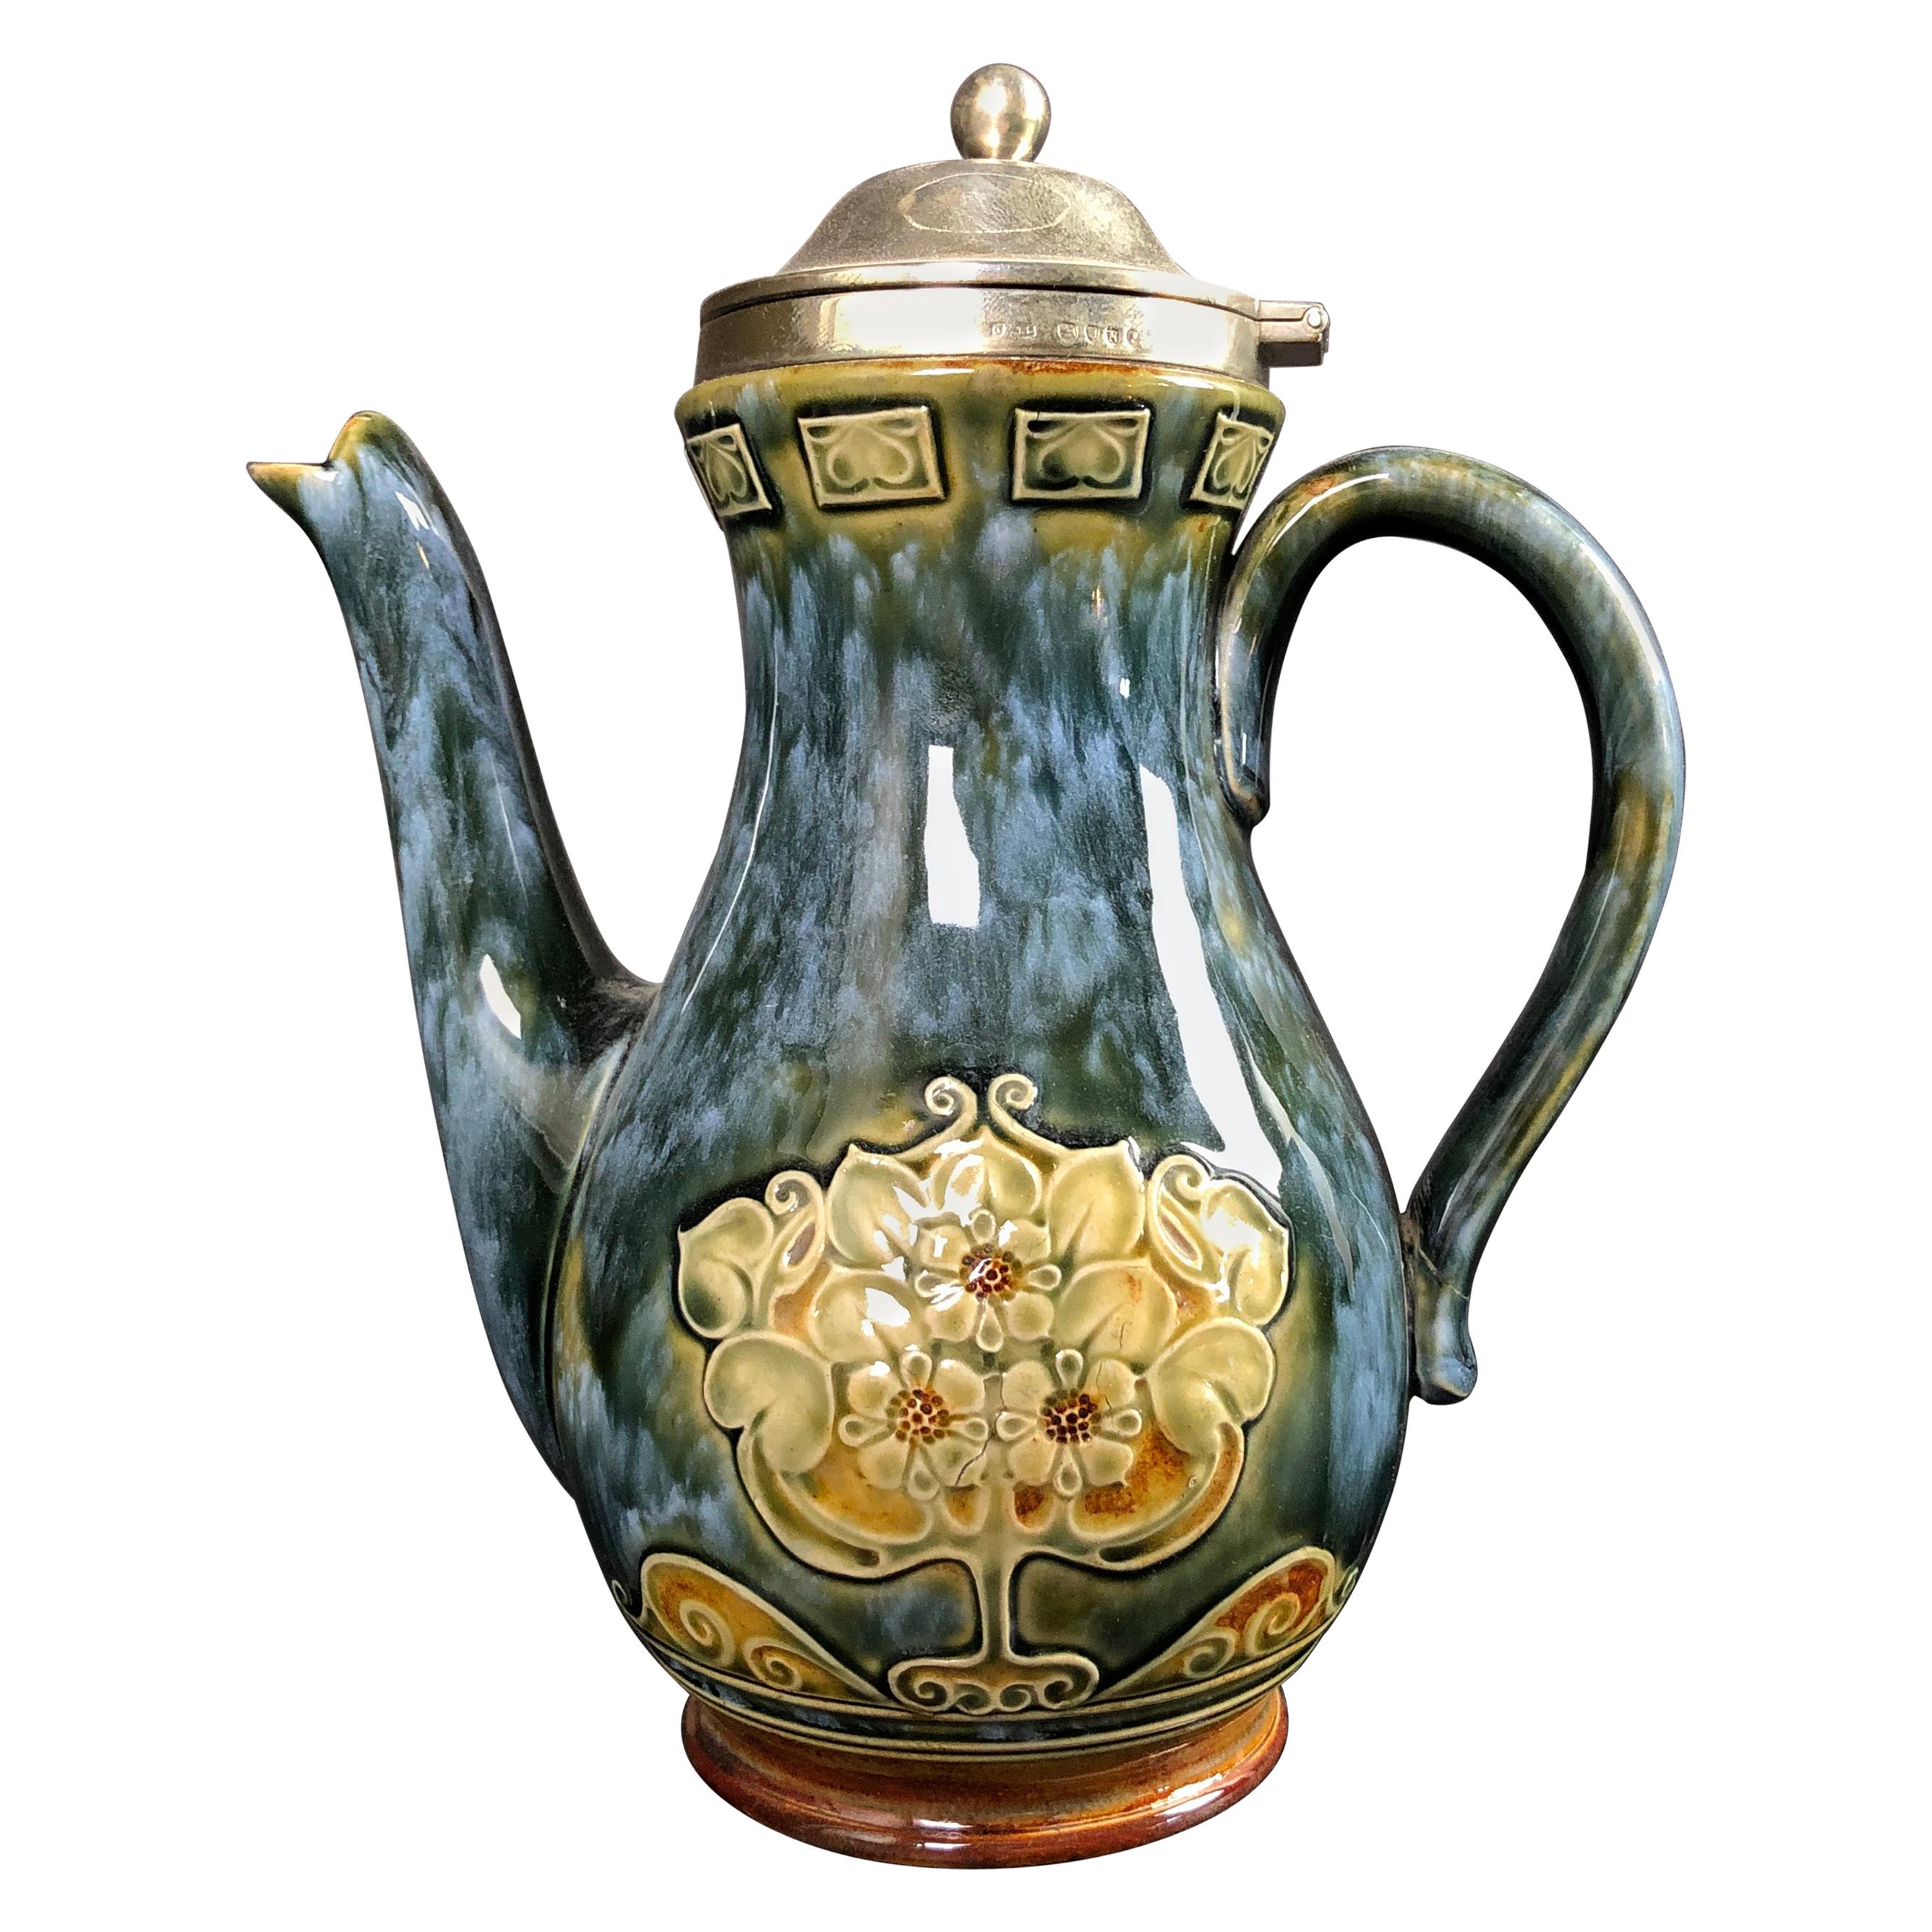 Thermos Carafe by Henry Dreyfuss (1904–1972) - Kirkland Museum